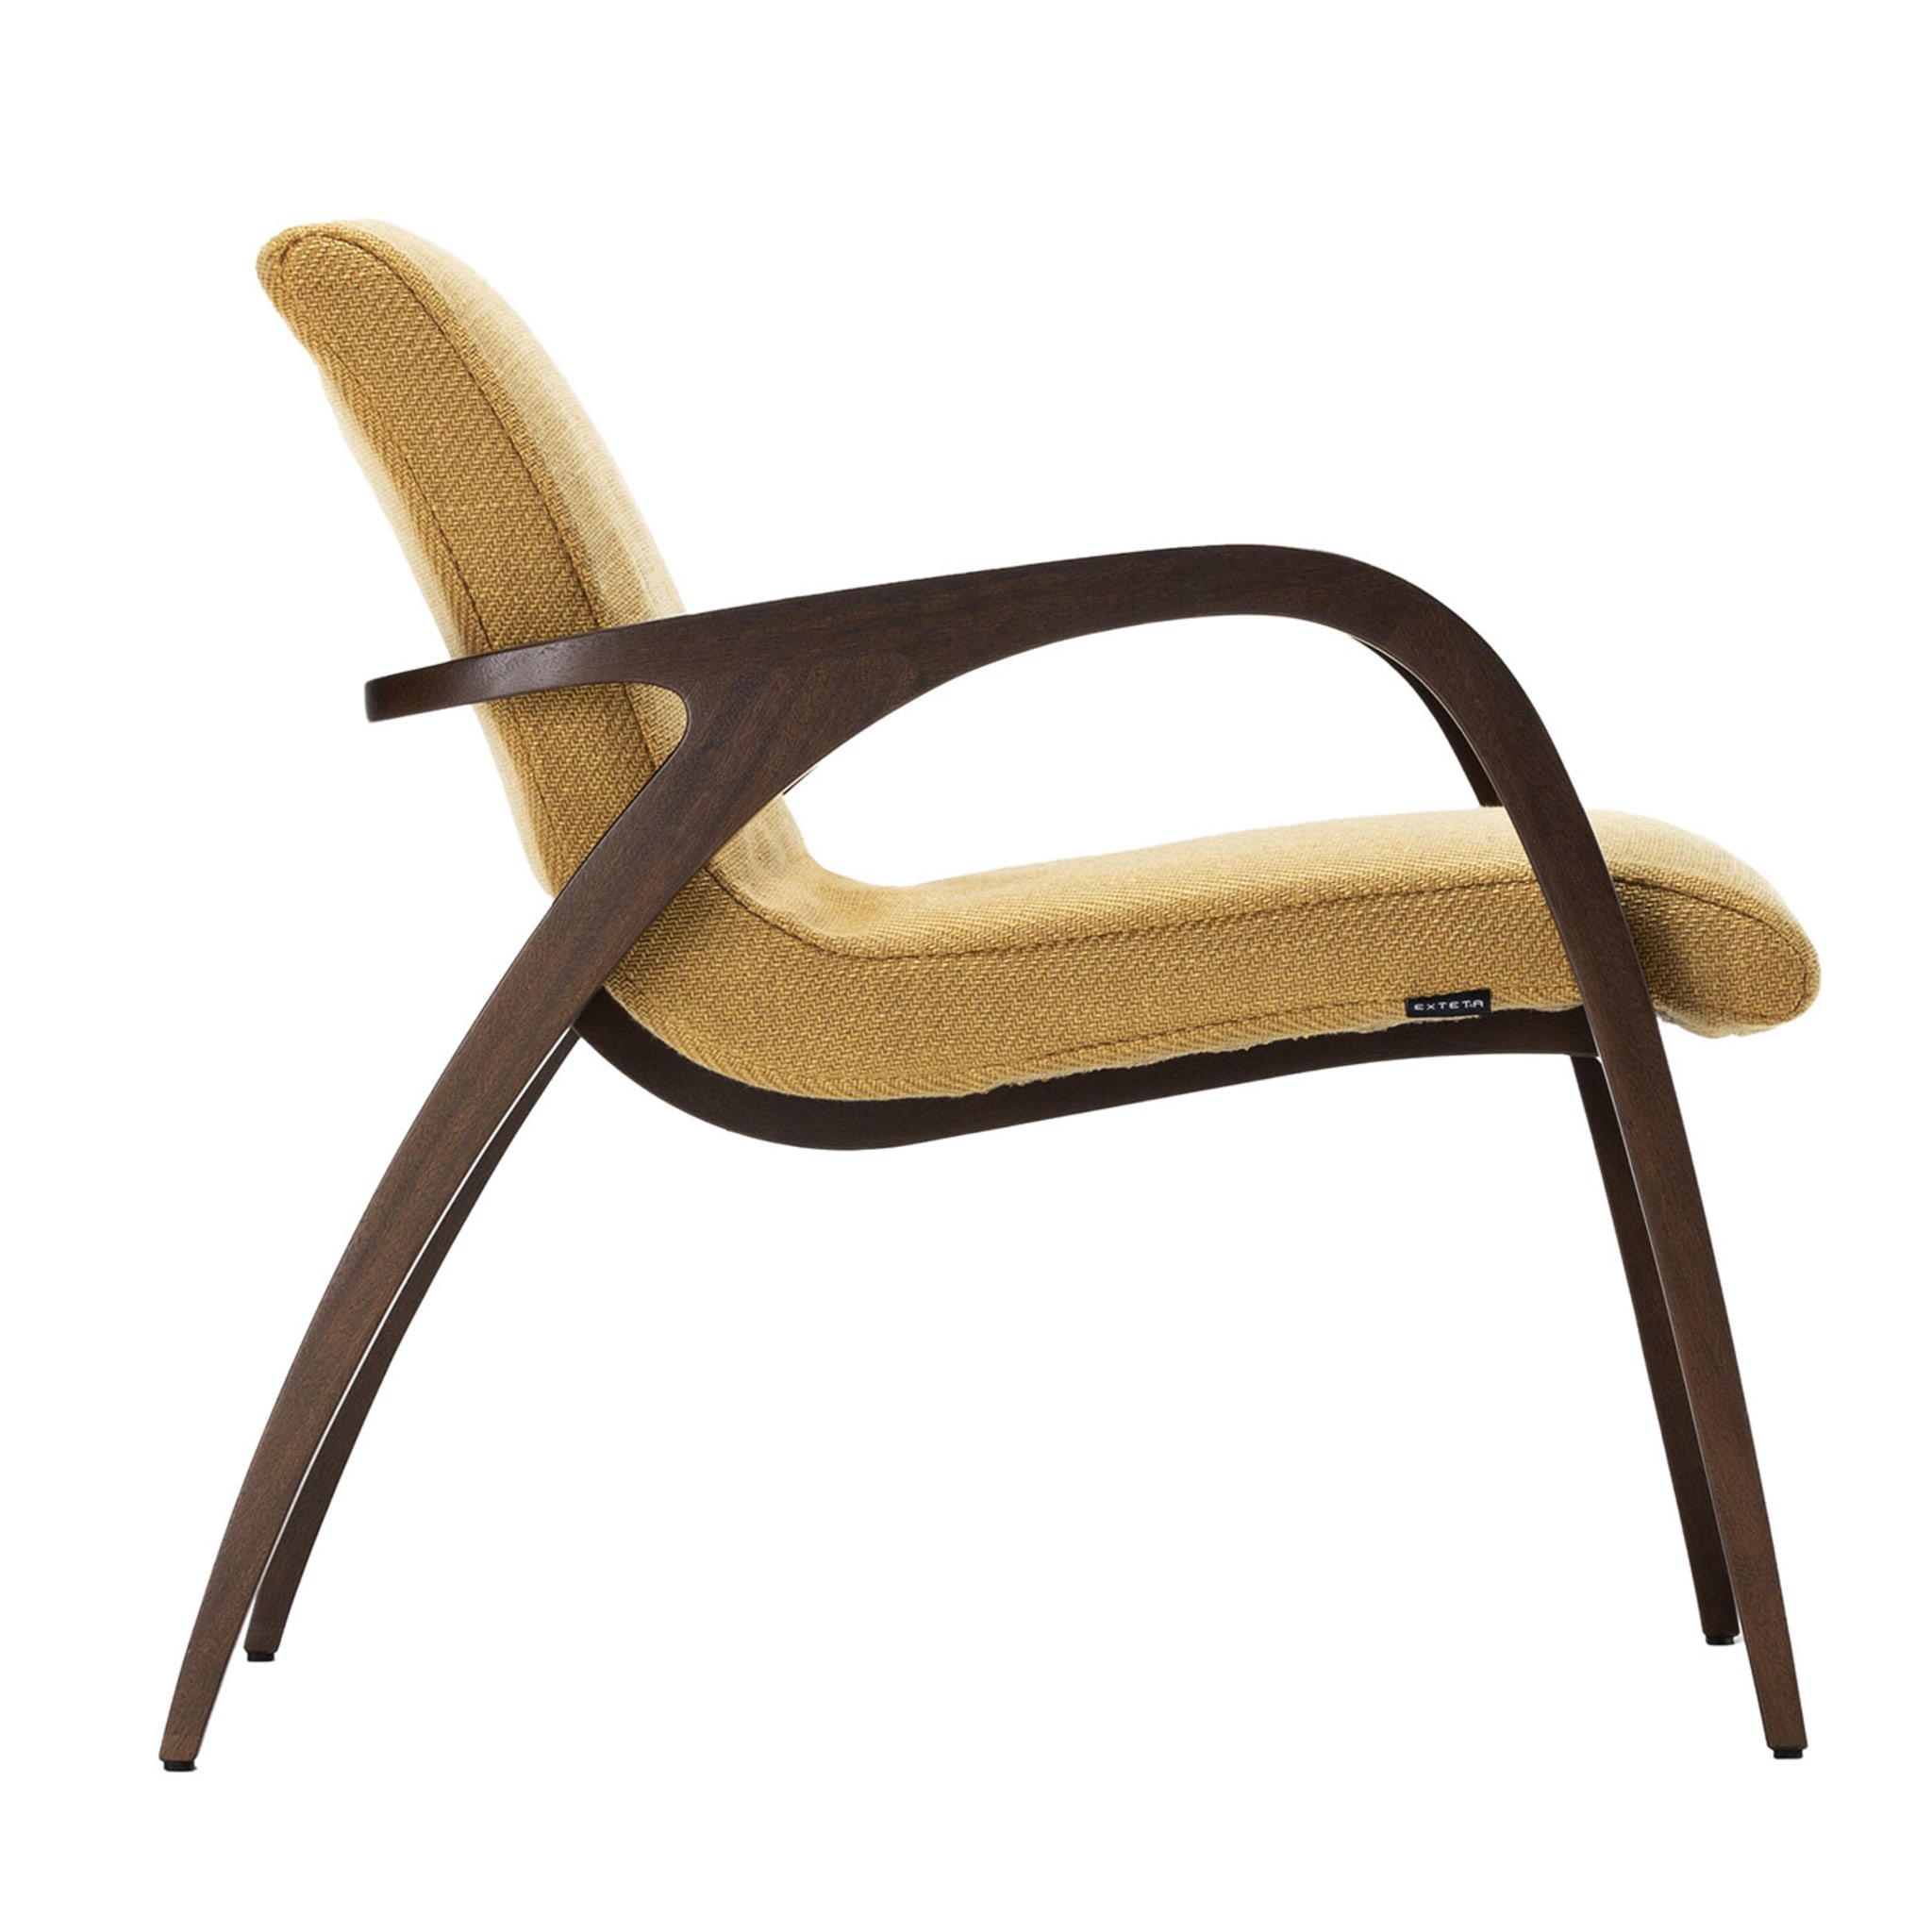 1938 Ginger & Brown Armchair by Franco Albini - Main view